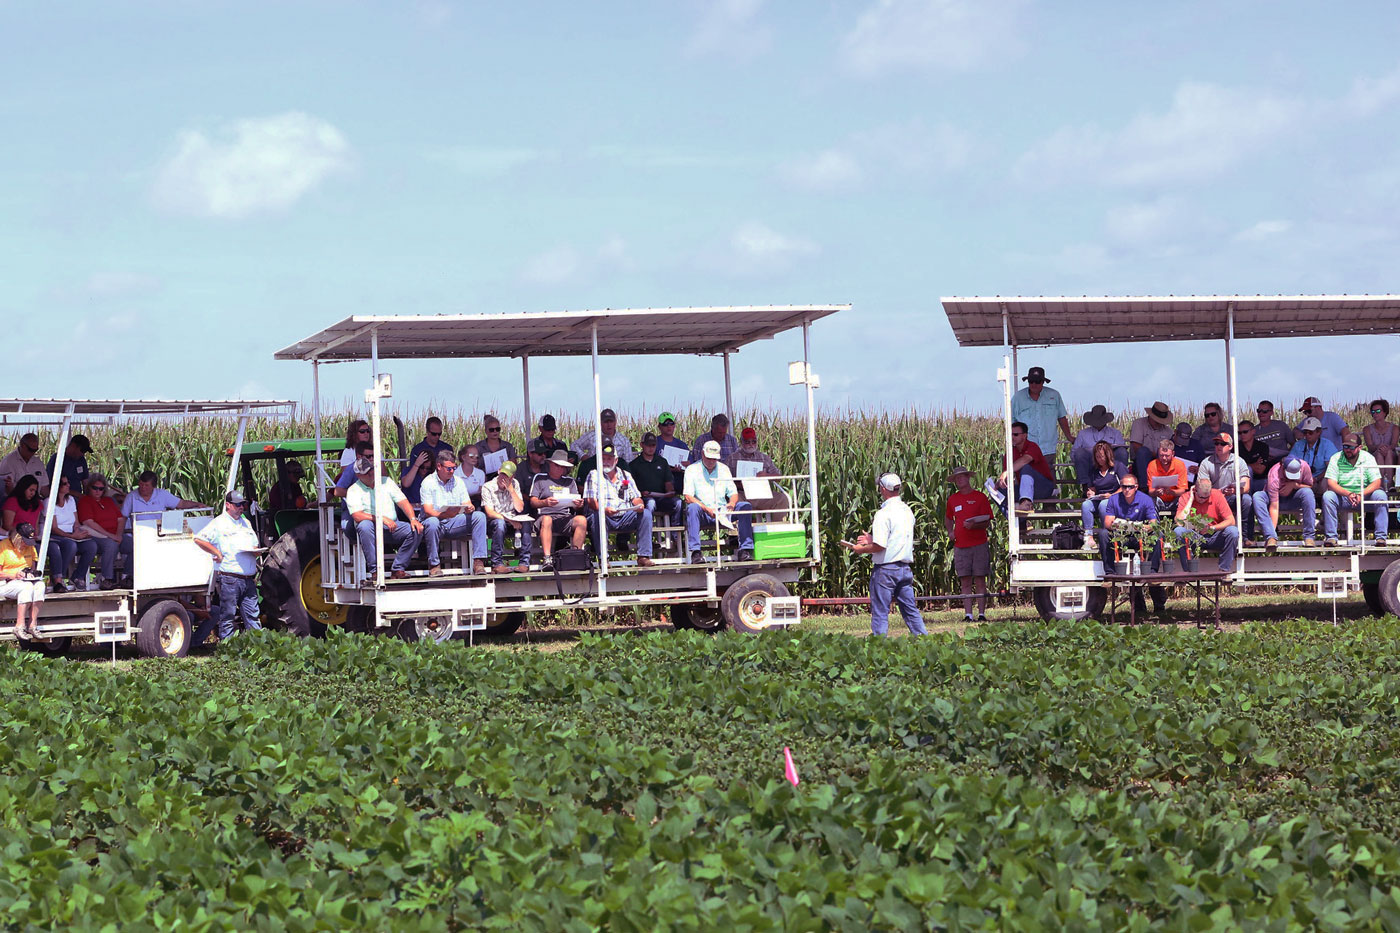 people on wagons in front of crop field